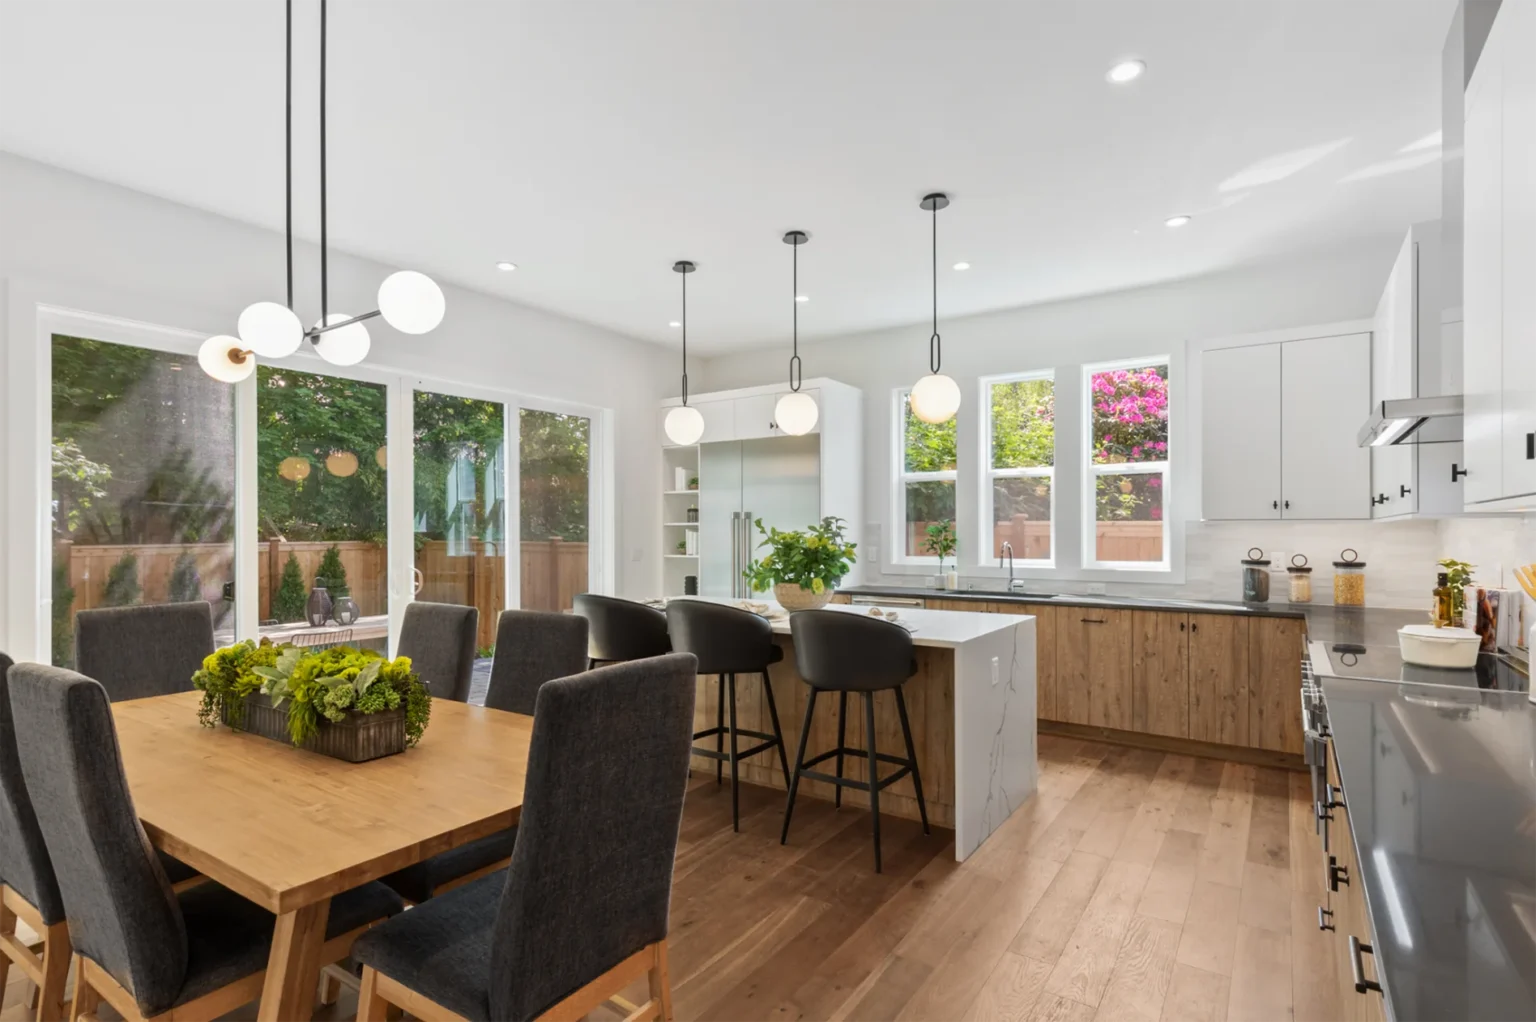 Seattle Transitional Style Home Interior Dining Area and Kitchen Island